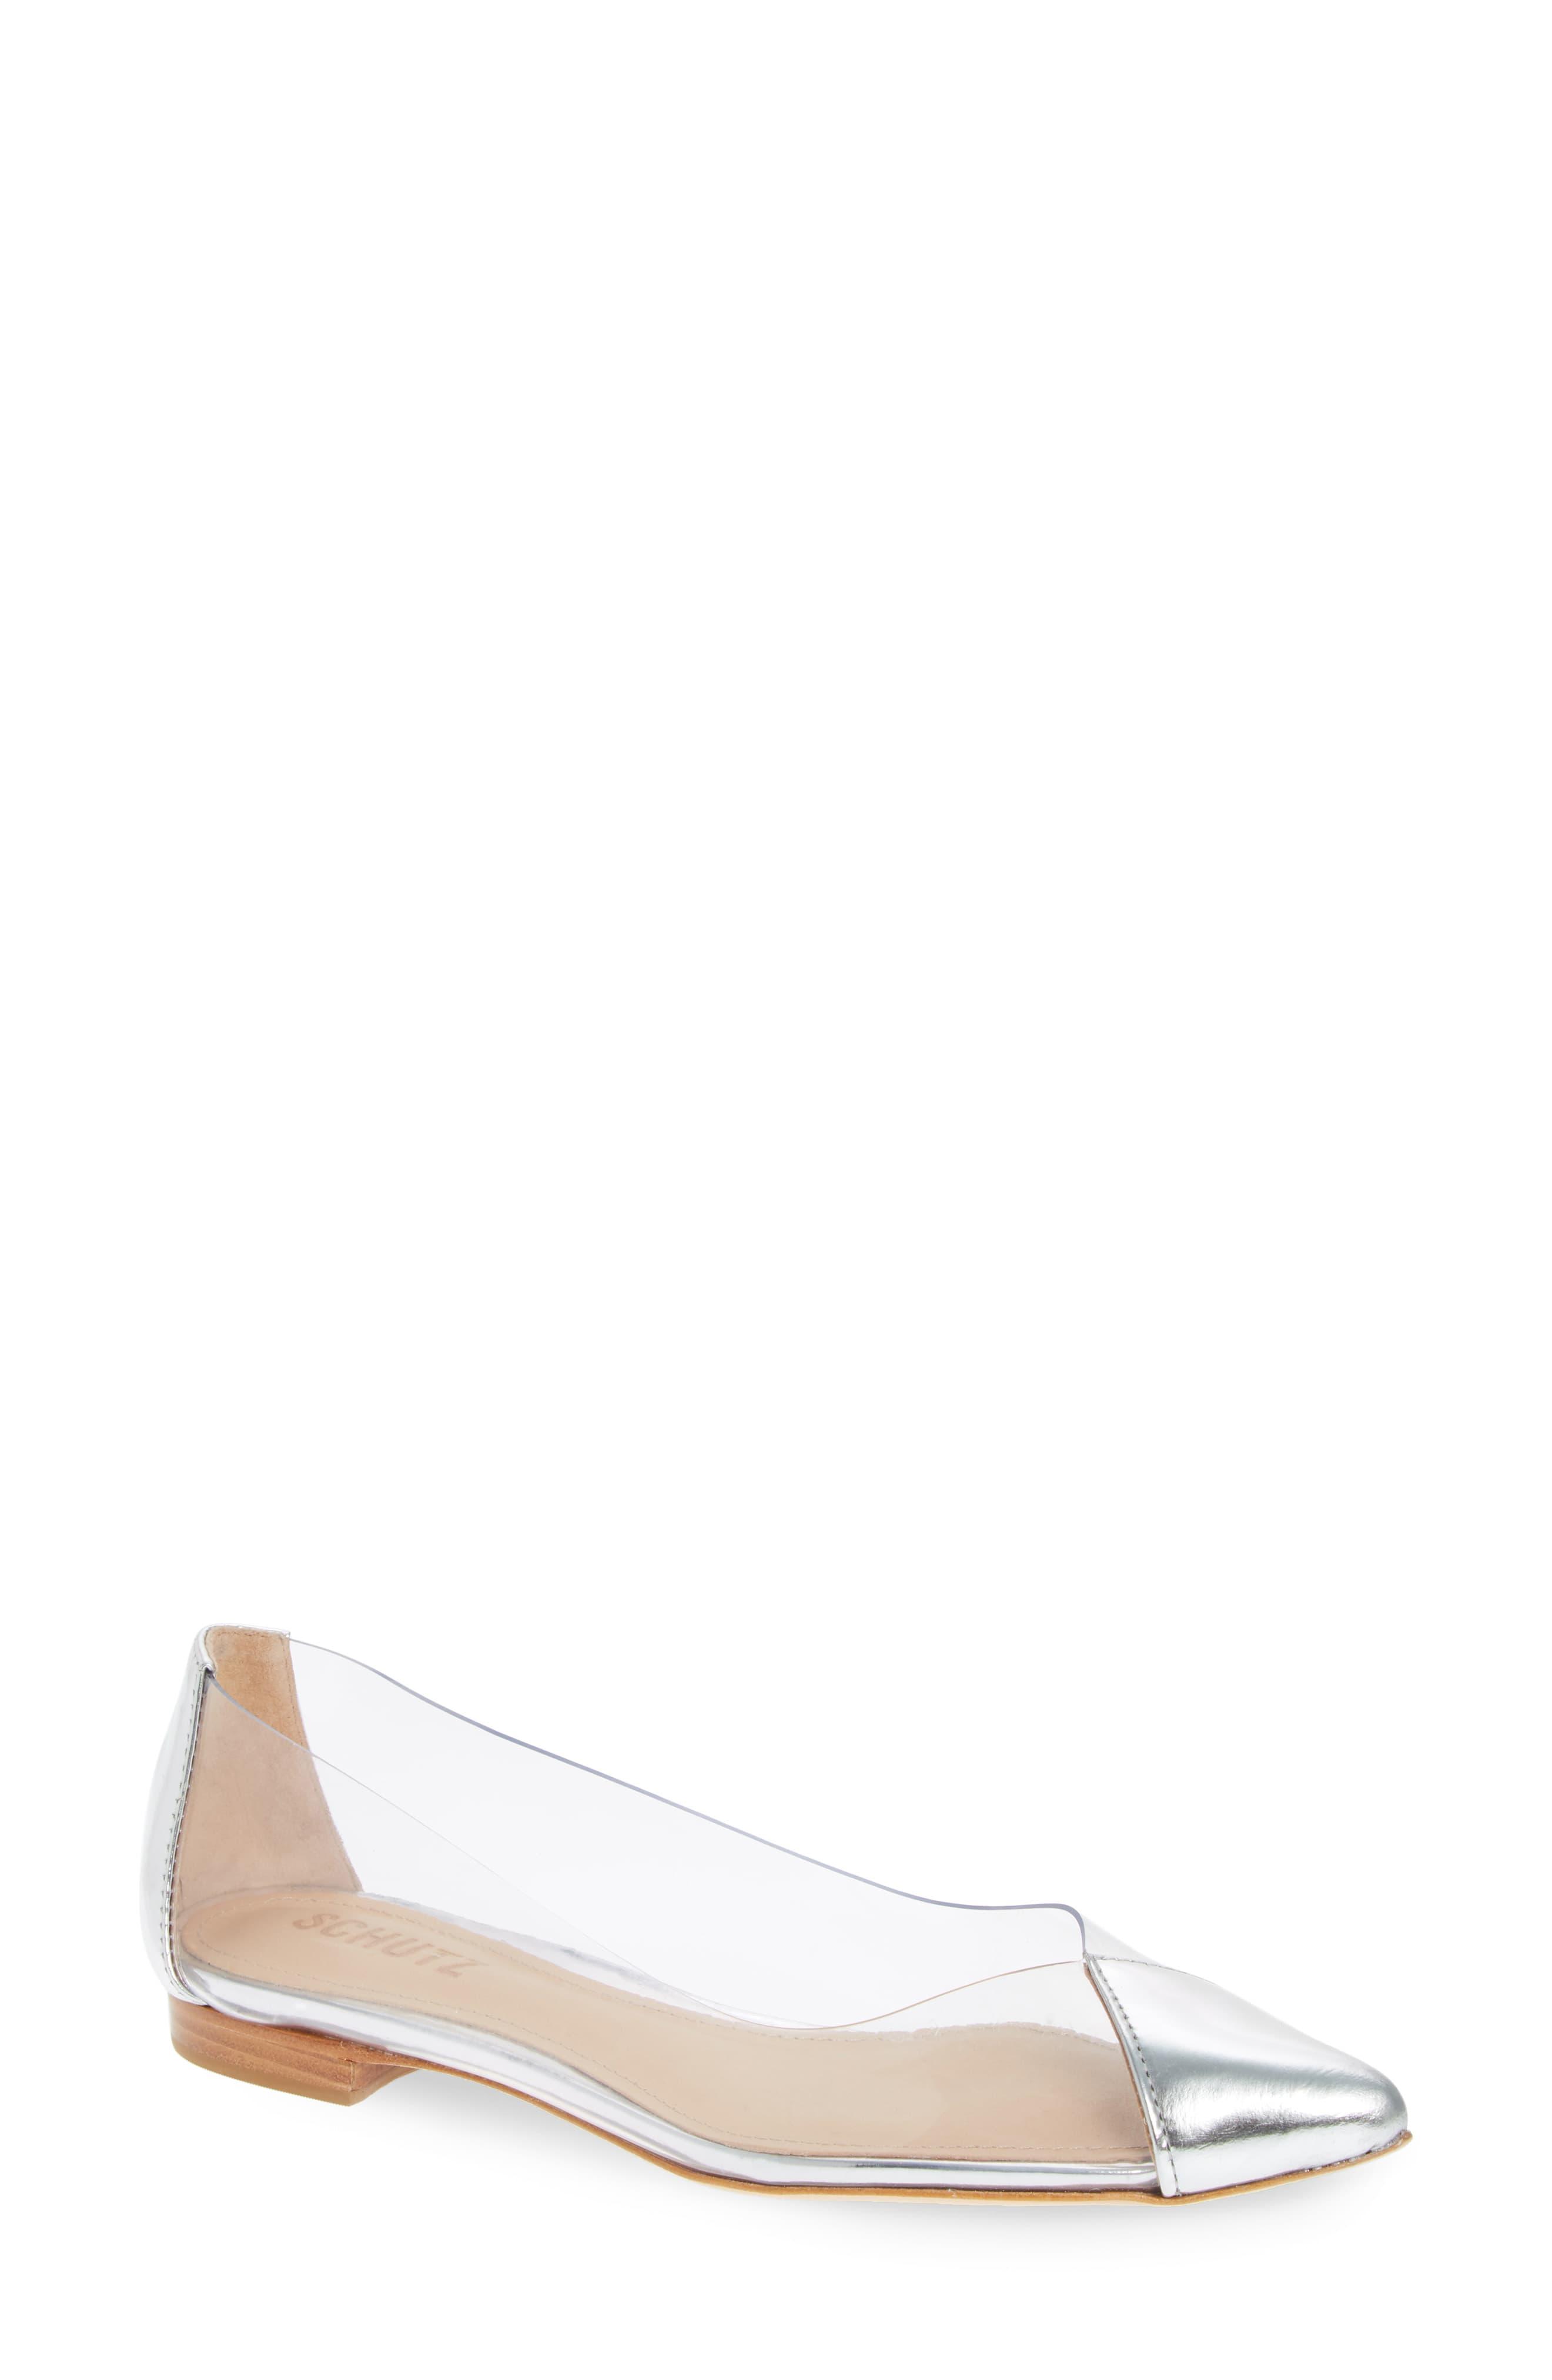 Schutz Clearly Pointy Toe Flat - Lyst